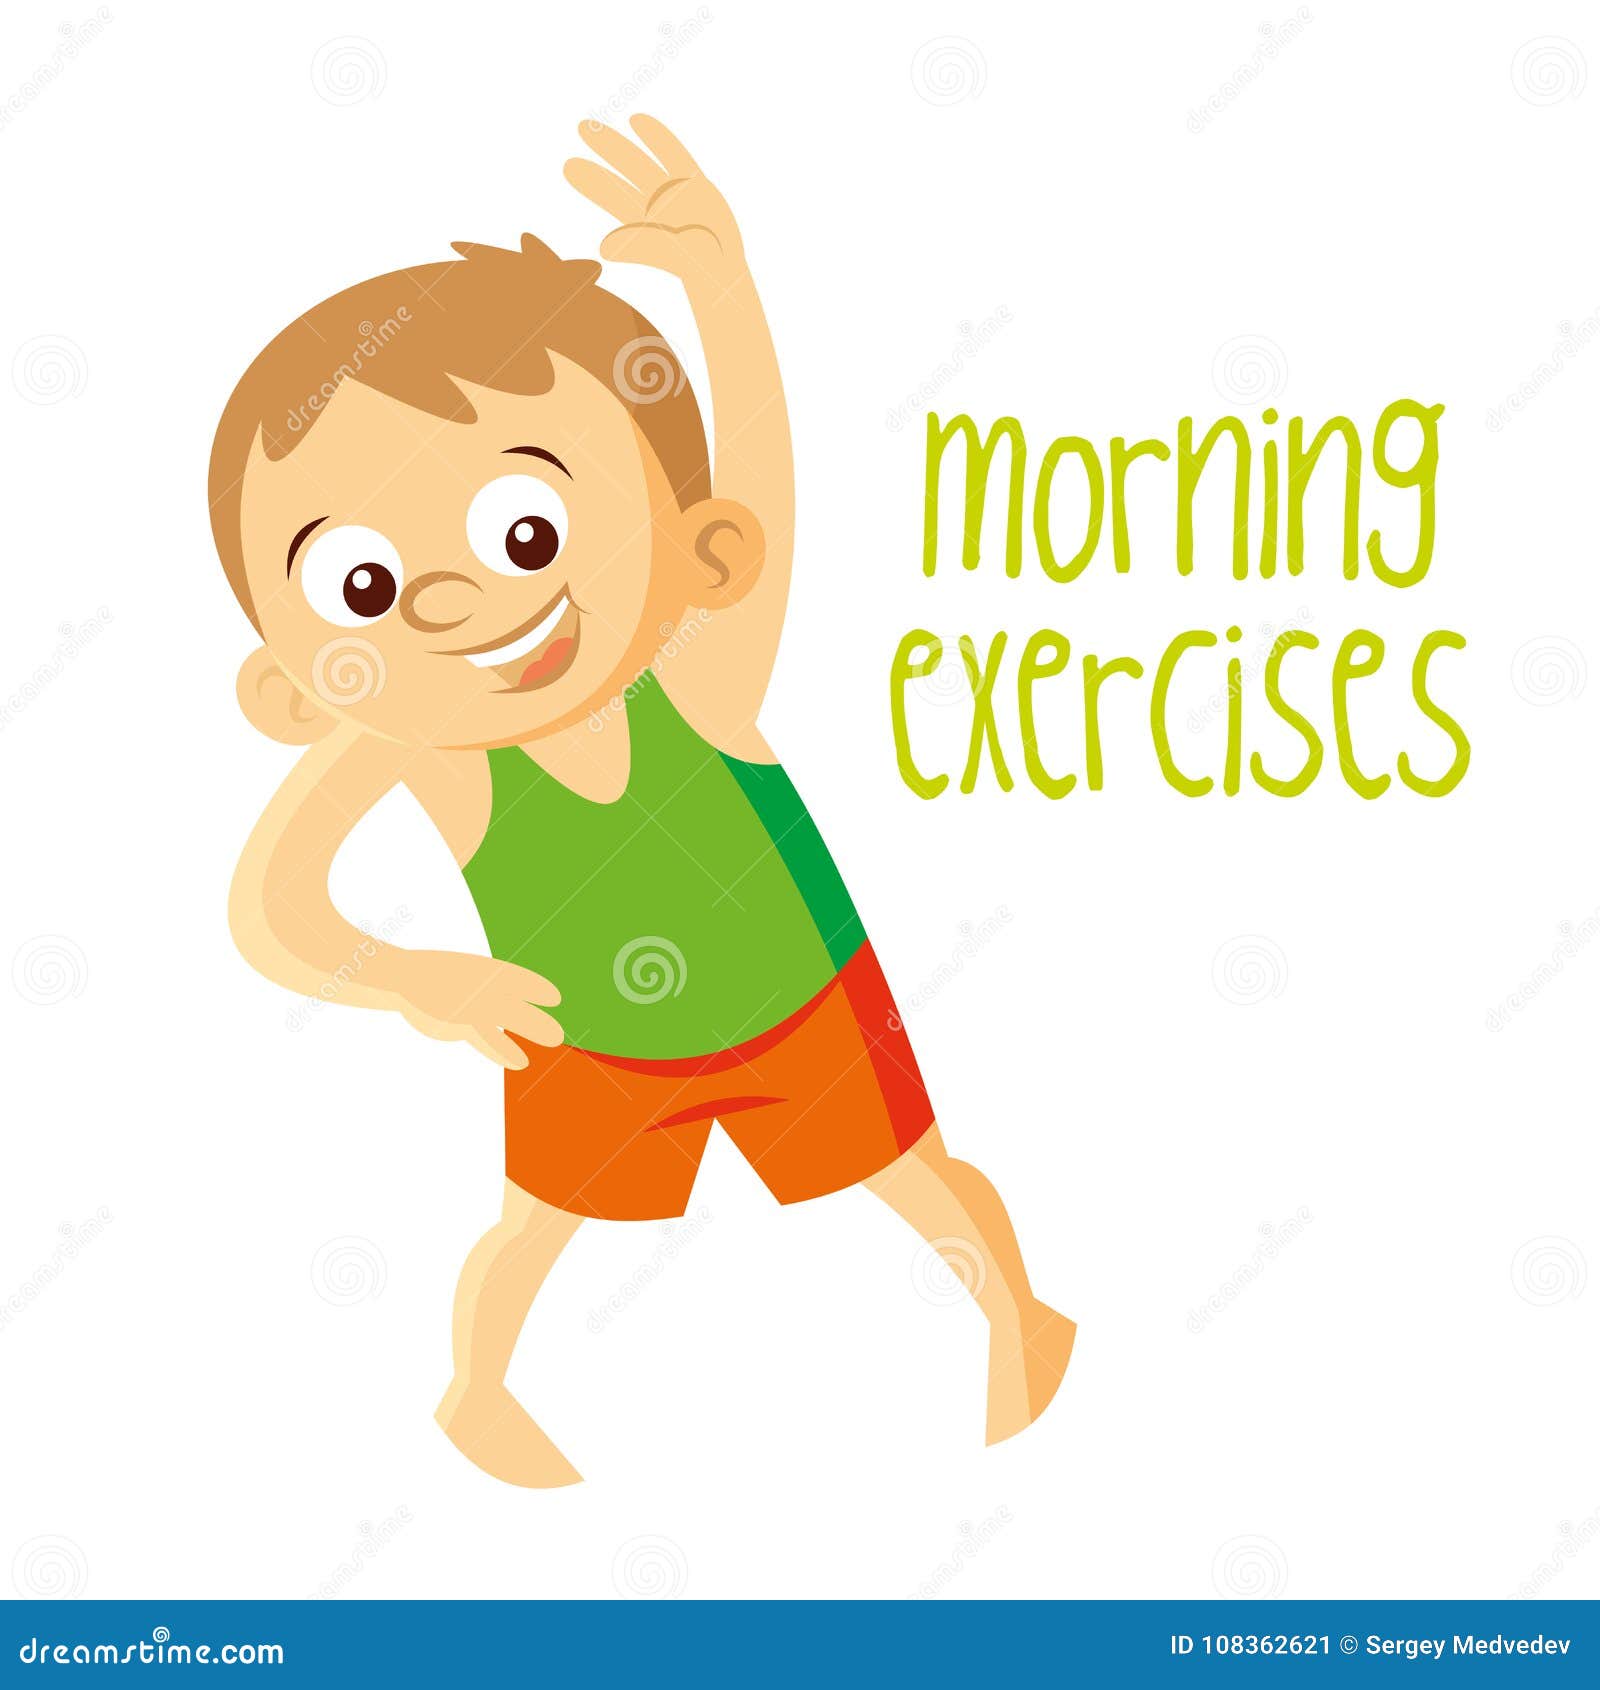 Do exercises picture. Картинки morning exercises. Do morning exercises картинка. Morning exercises вектор. Morning exercises for children.